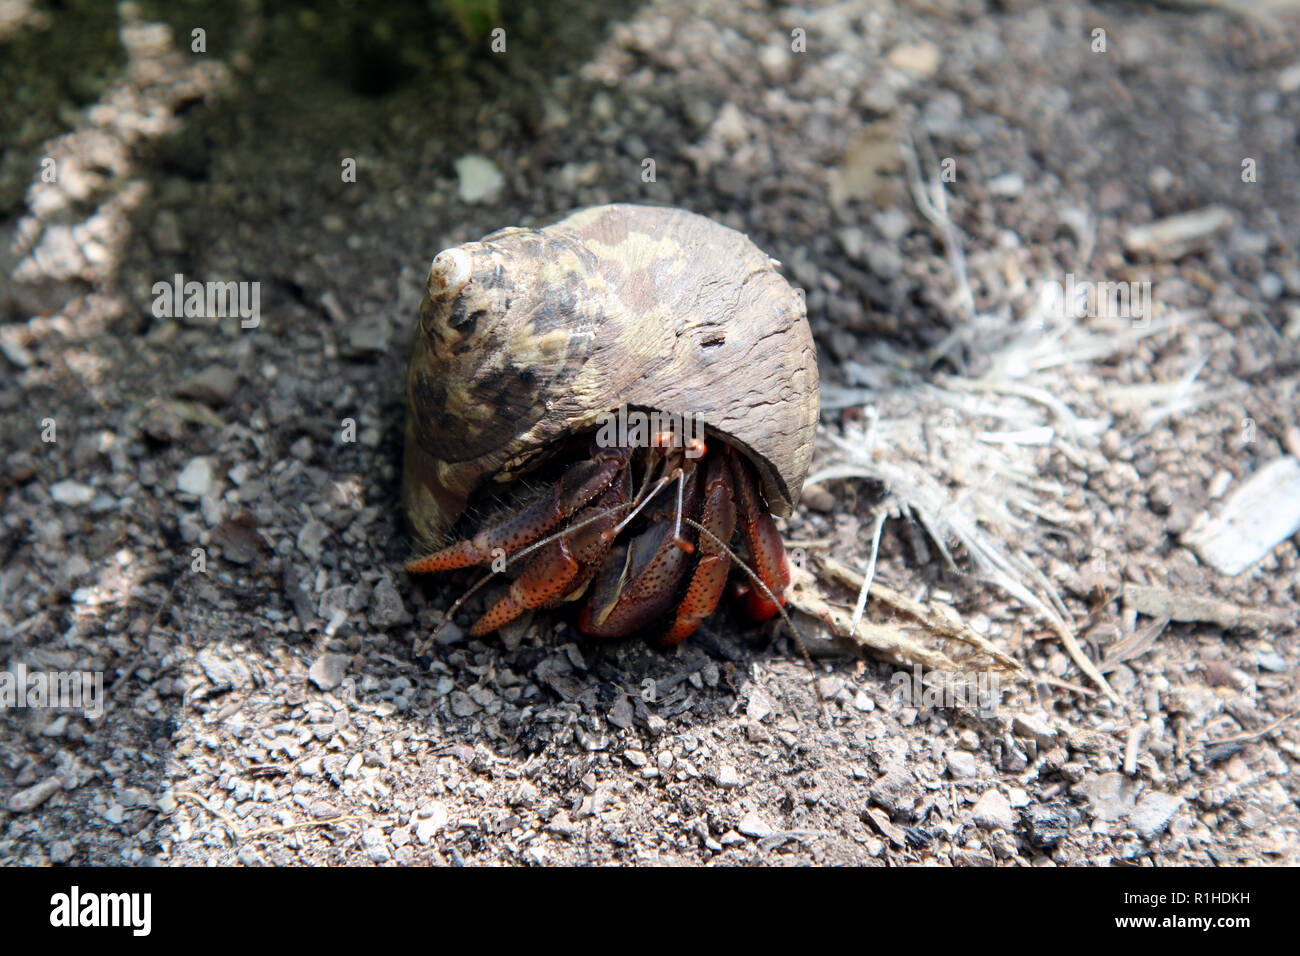 Hermit crab peeks from under his shell in the dirt, Isla Grande, Colombia Stock Photo